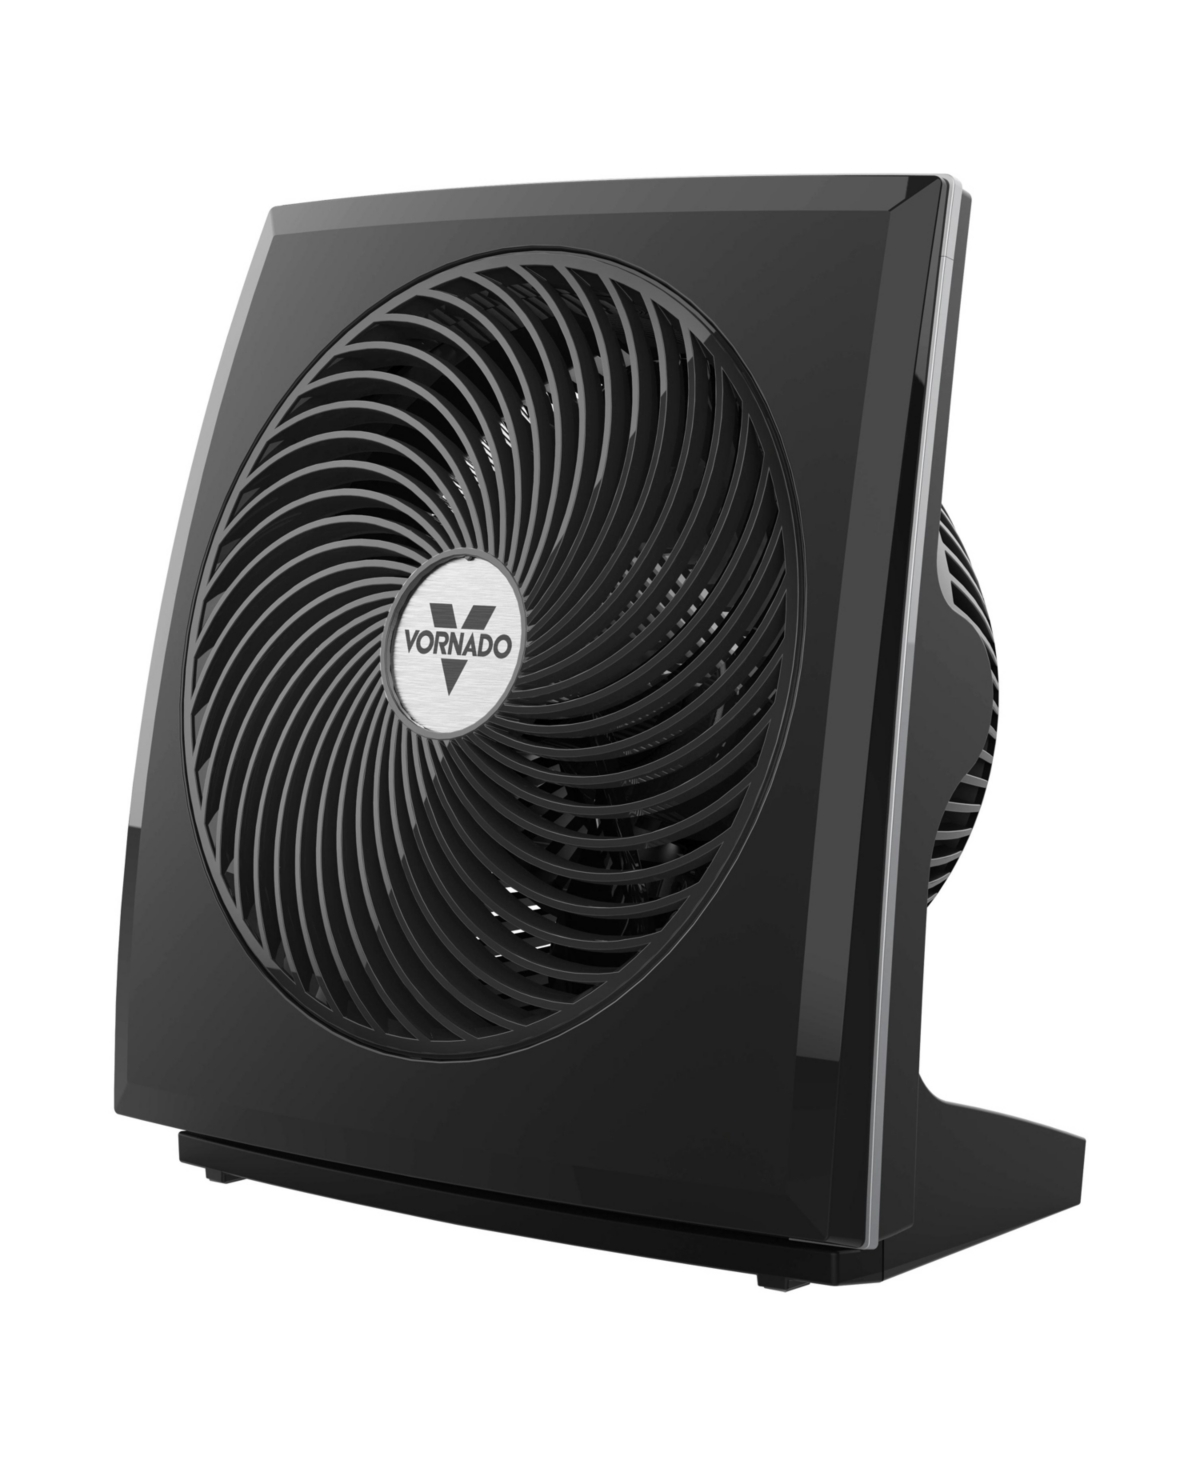 Vornado 673t Whole Room Air Circulator Fan With Pivoting Head, 3 Speeds, Moves Air Up To 70 Feet In Black